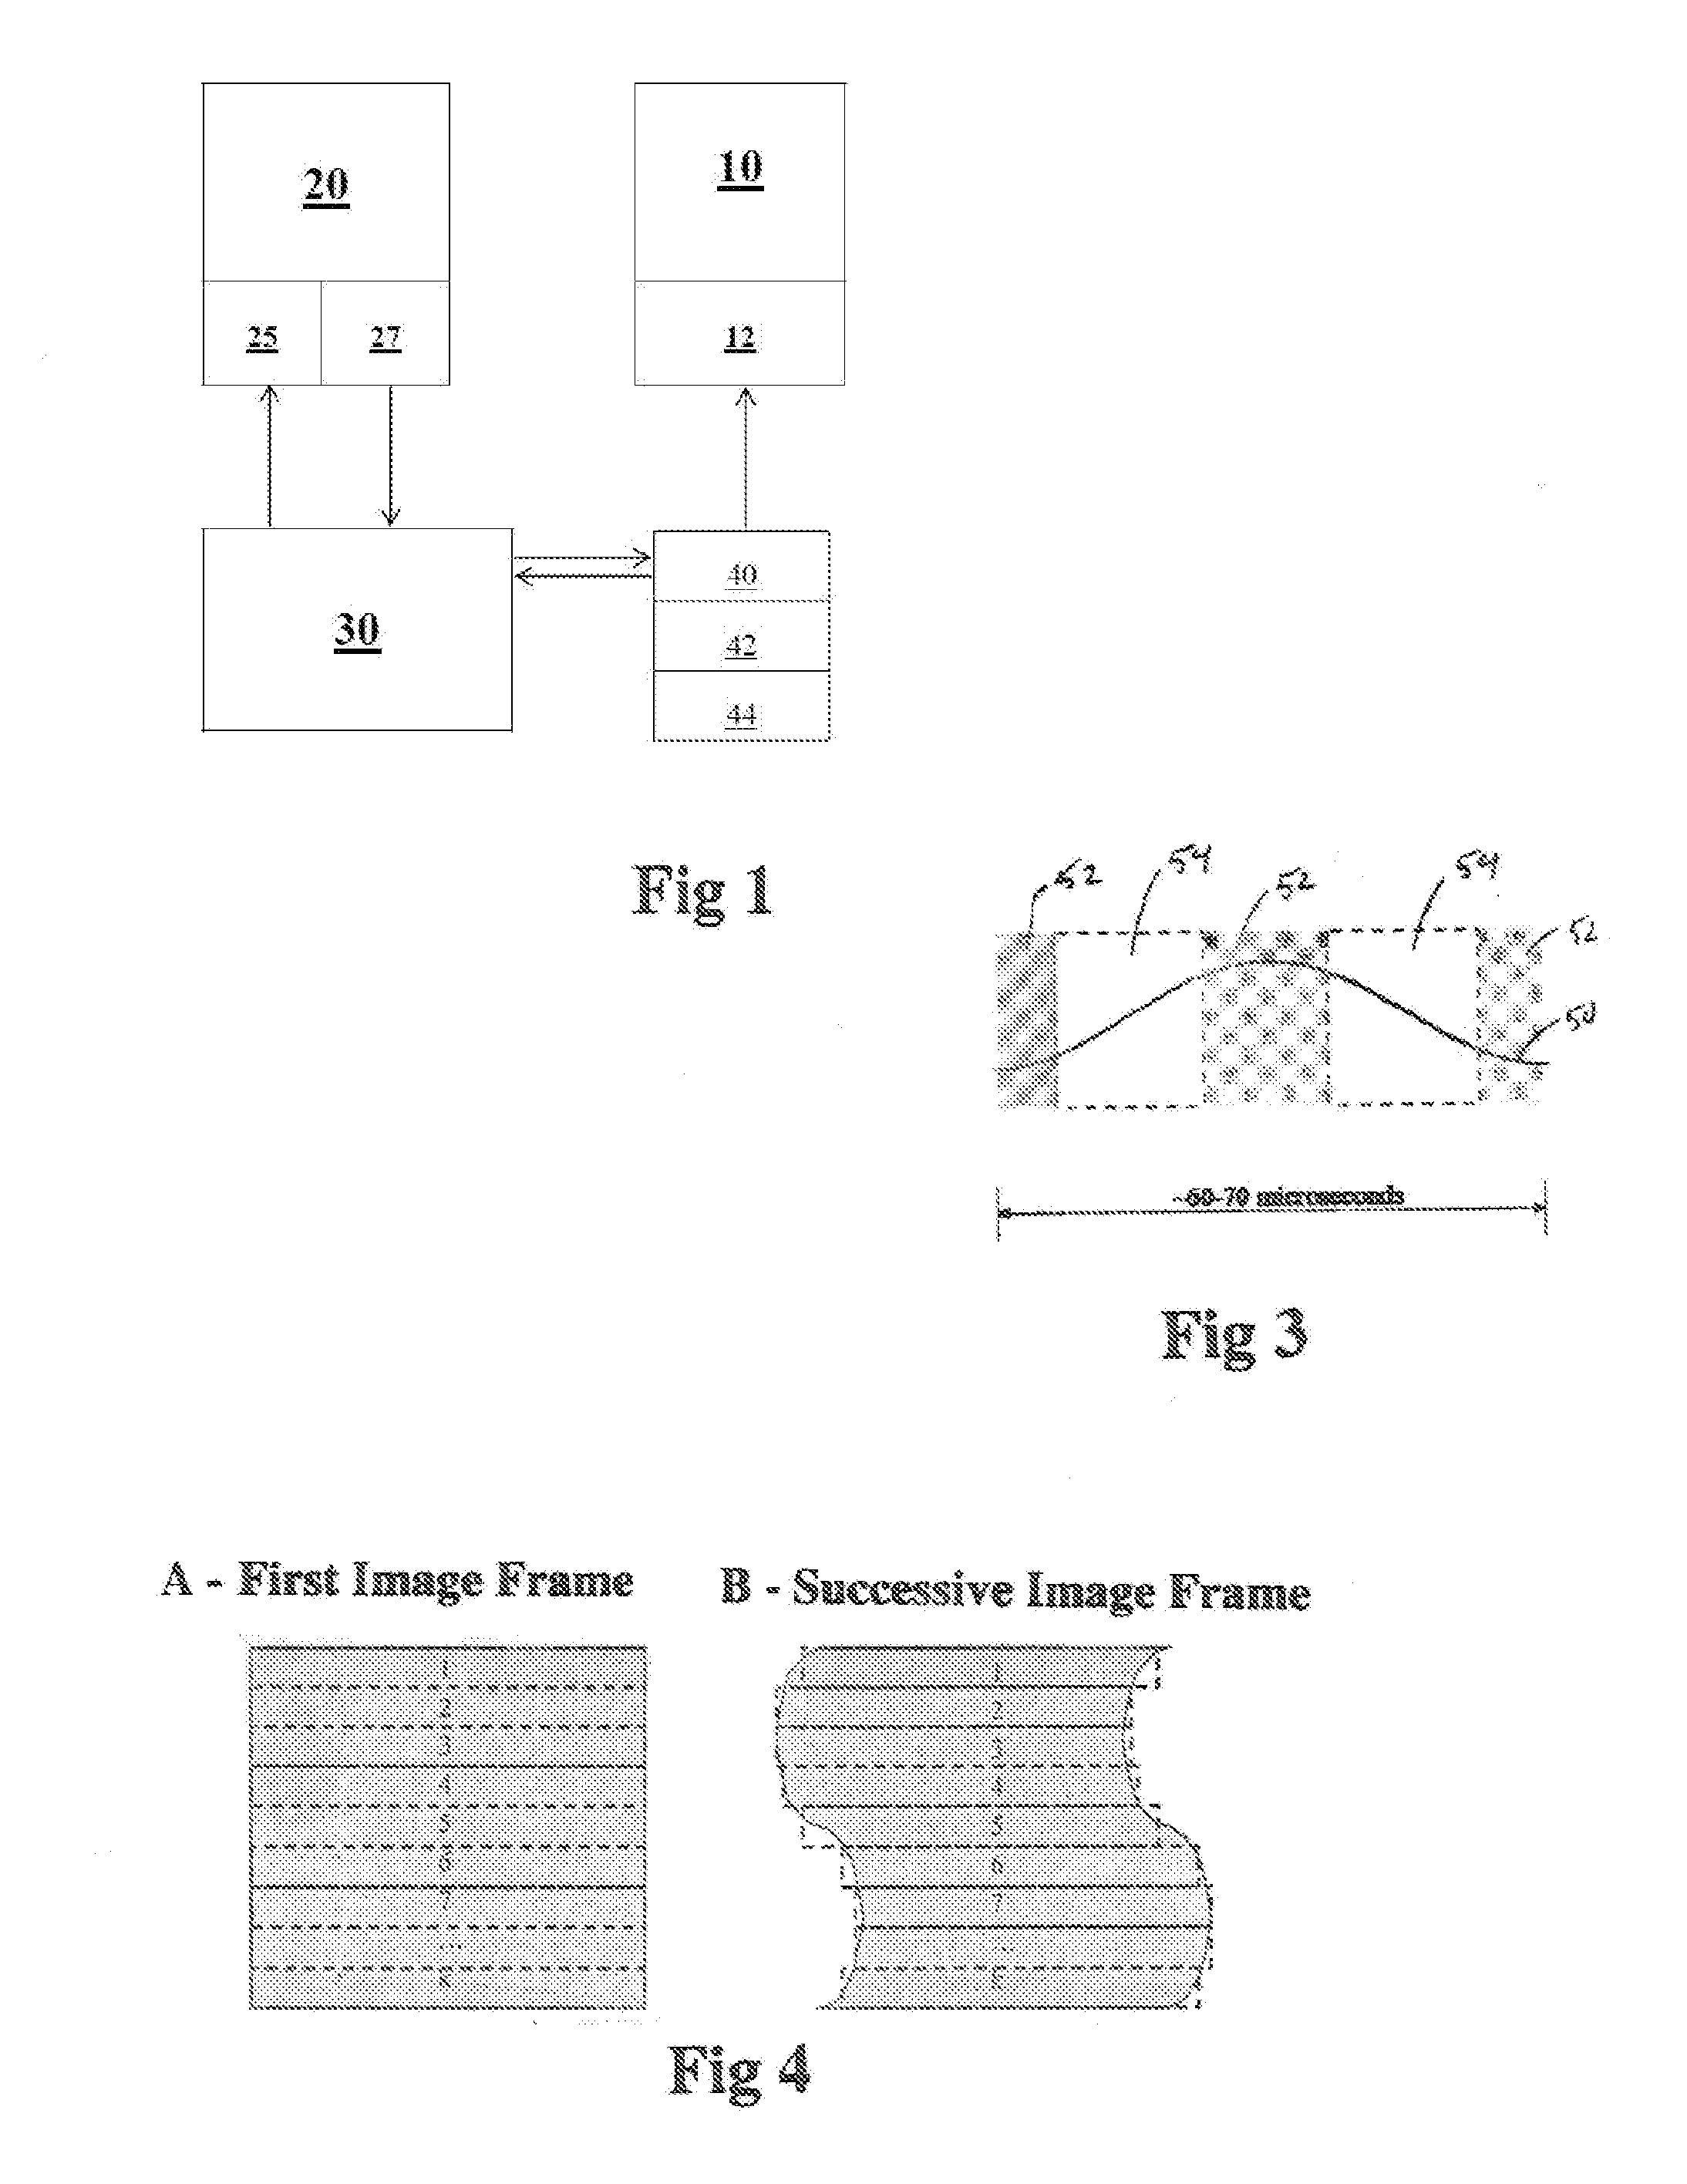 Method of imaging multiple retinal structures